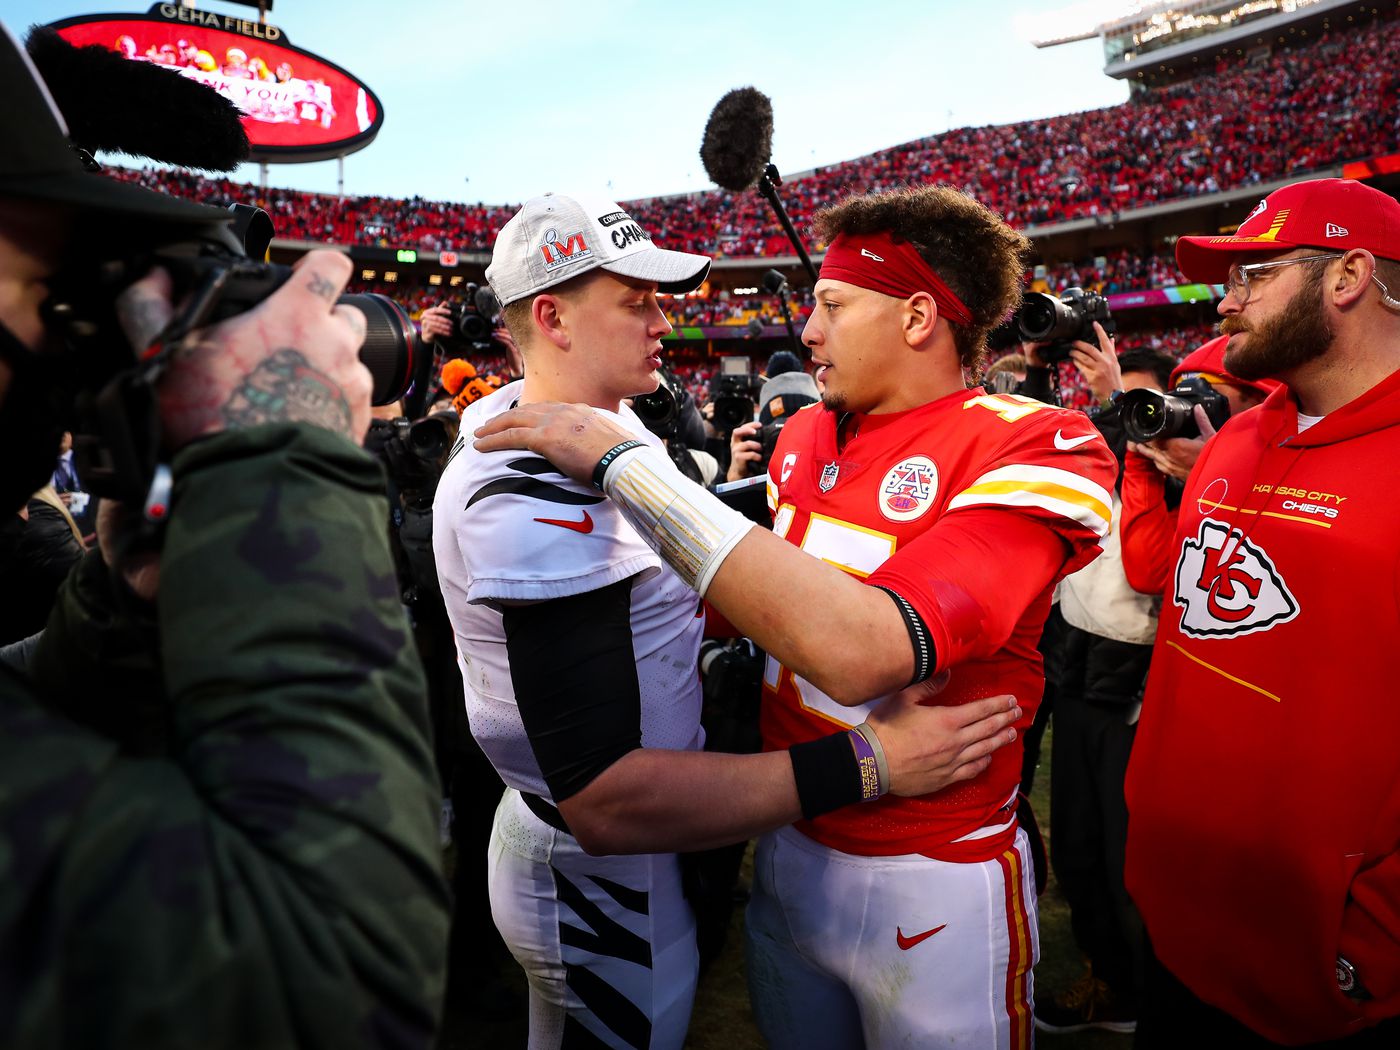 The Bengals' dominance against Patrick Mahomes' Chiefs, explained 